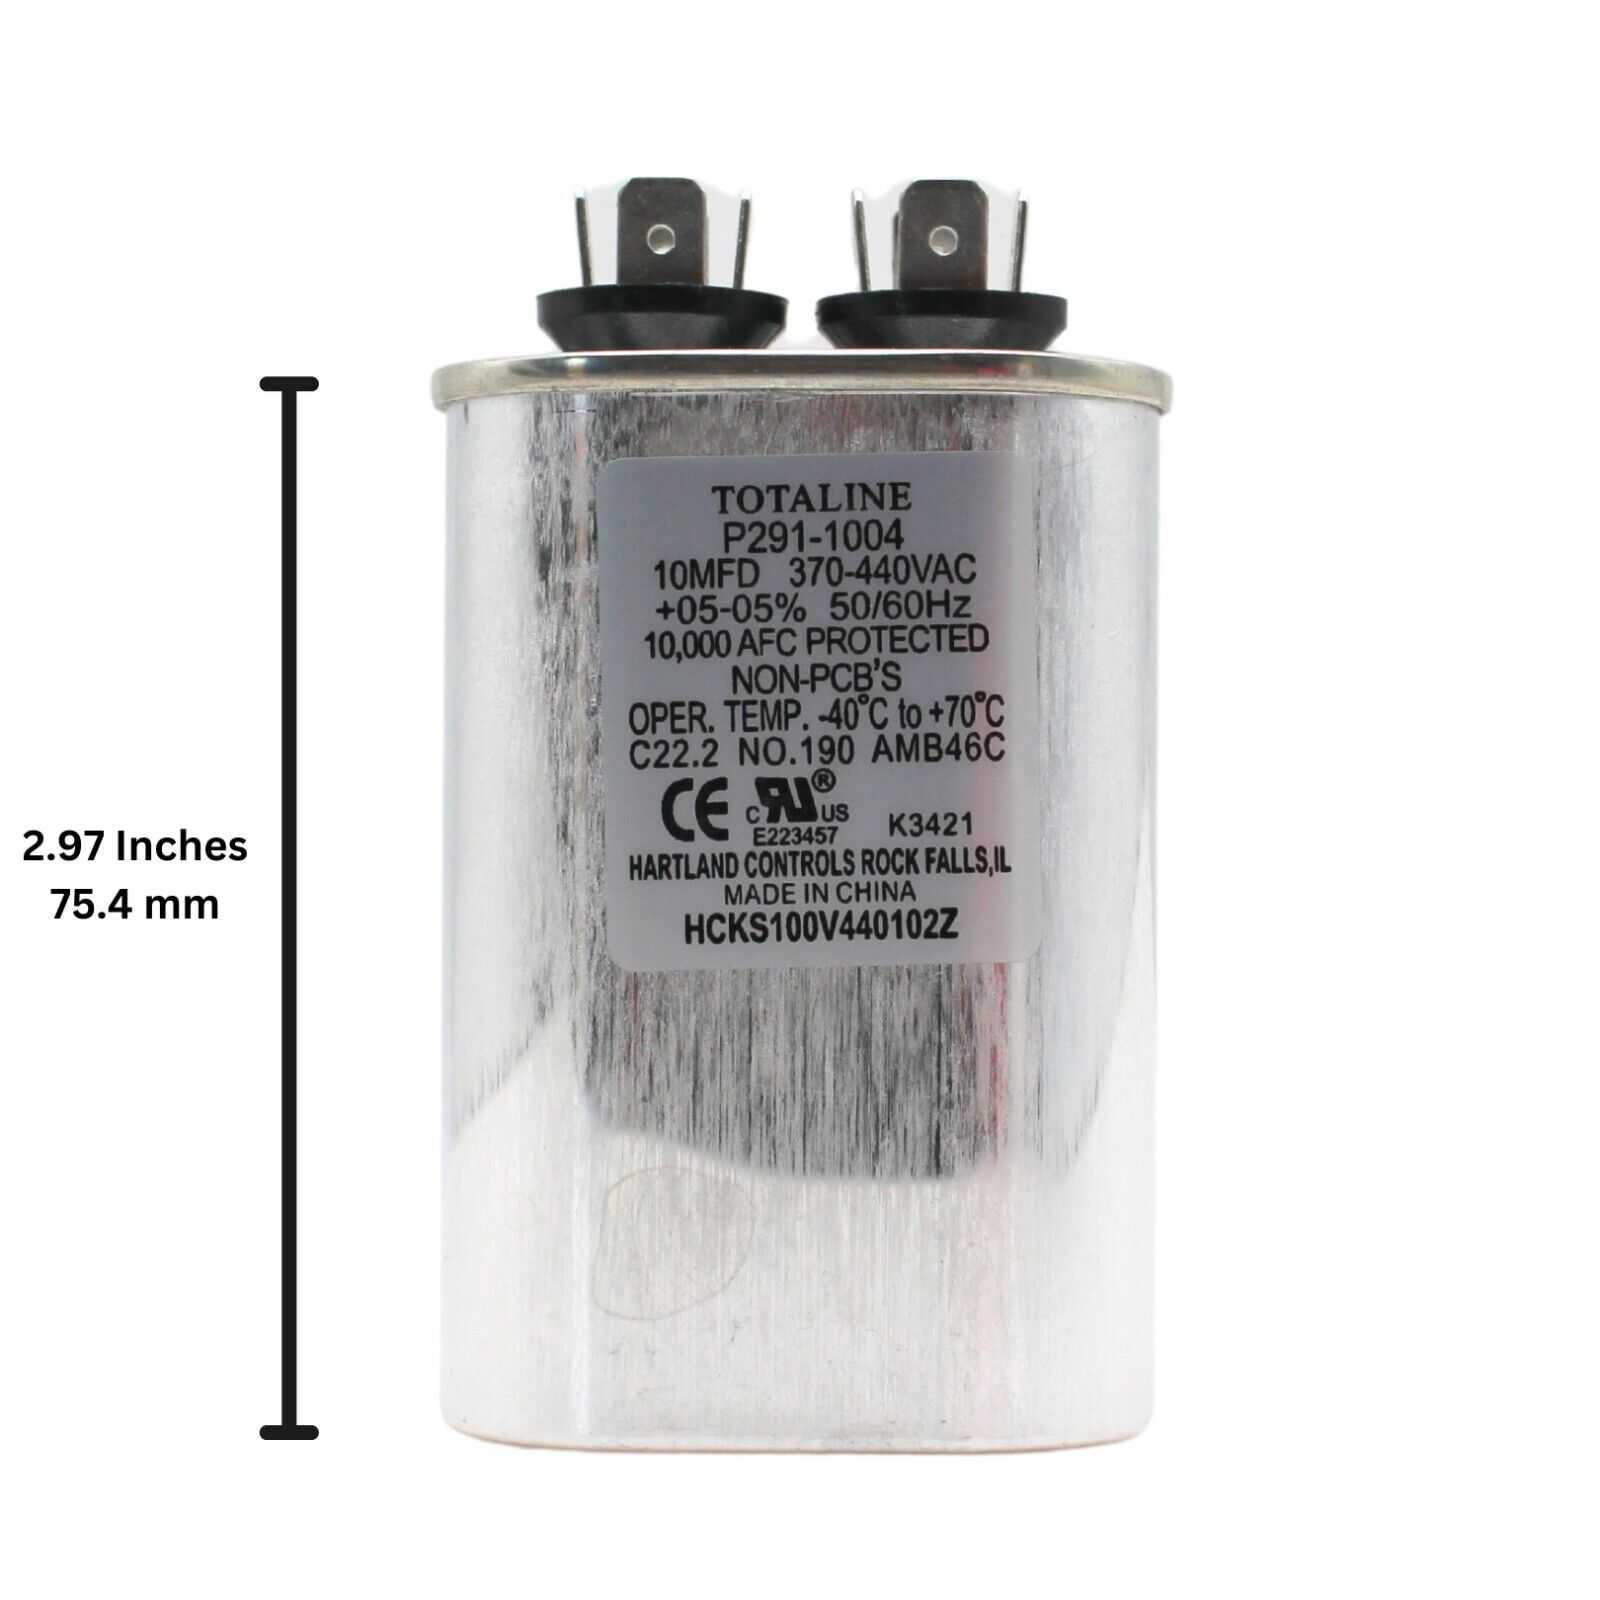 Totaline by Carrier P291-1004 10uF 370/440VAC 50/60Hz Oval Run Start Capacitor